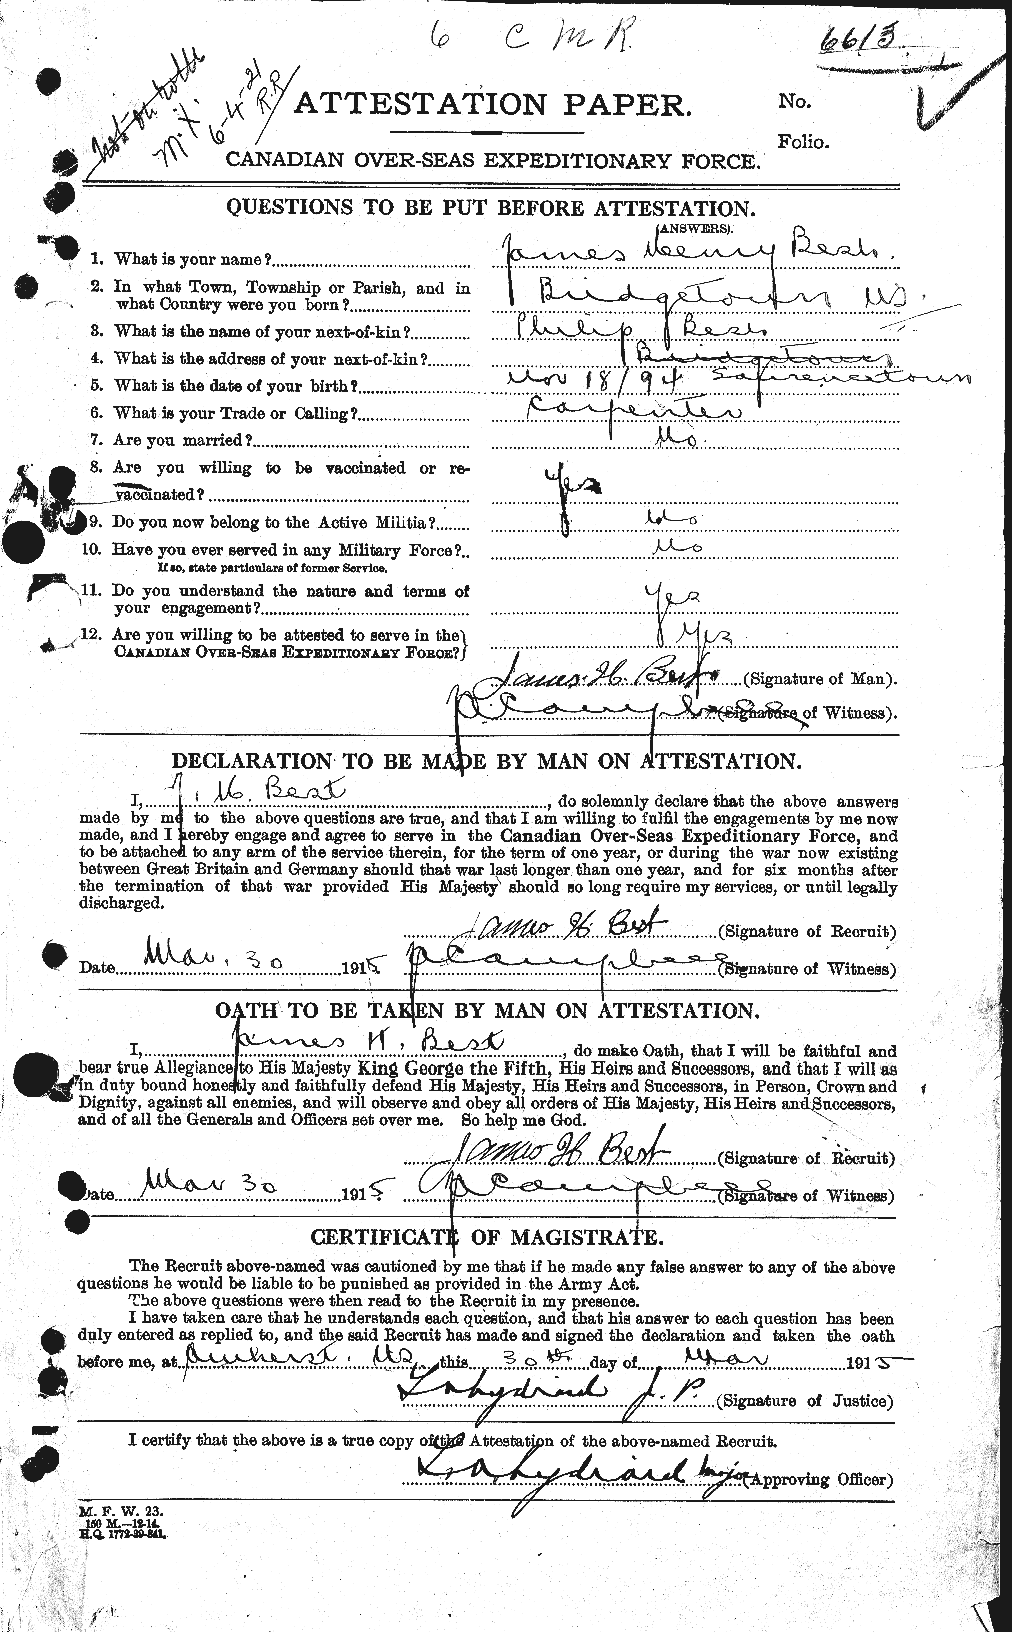 Personnel Records of the First World War - CEF 240282a